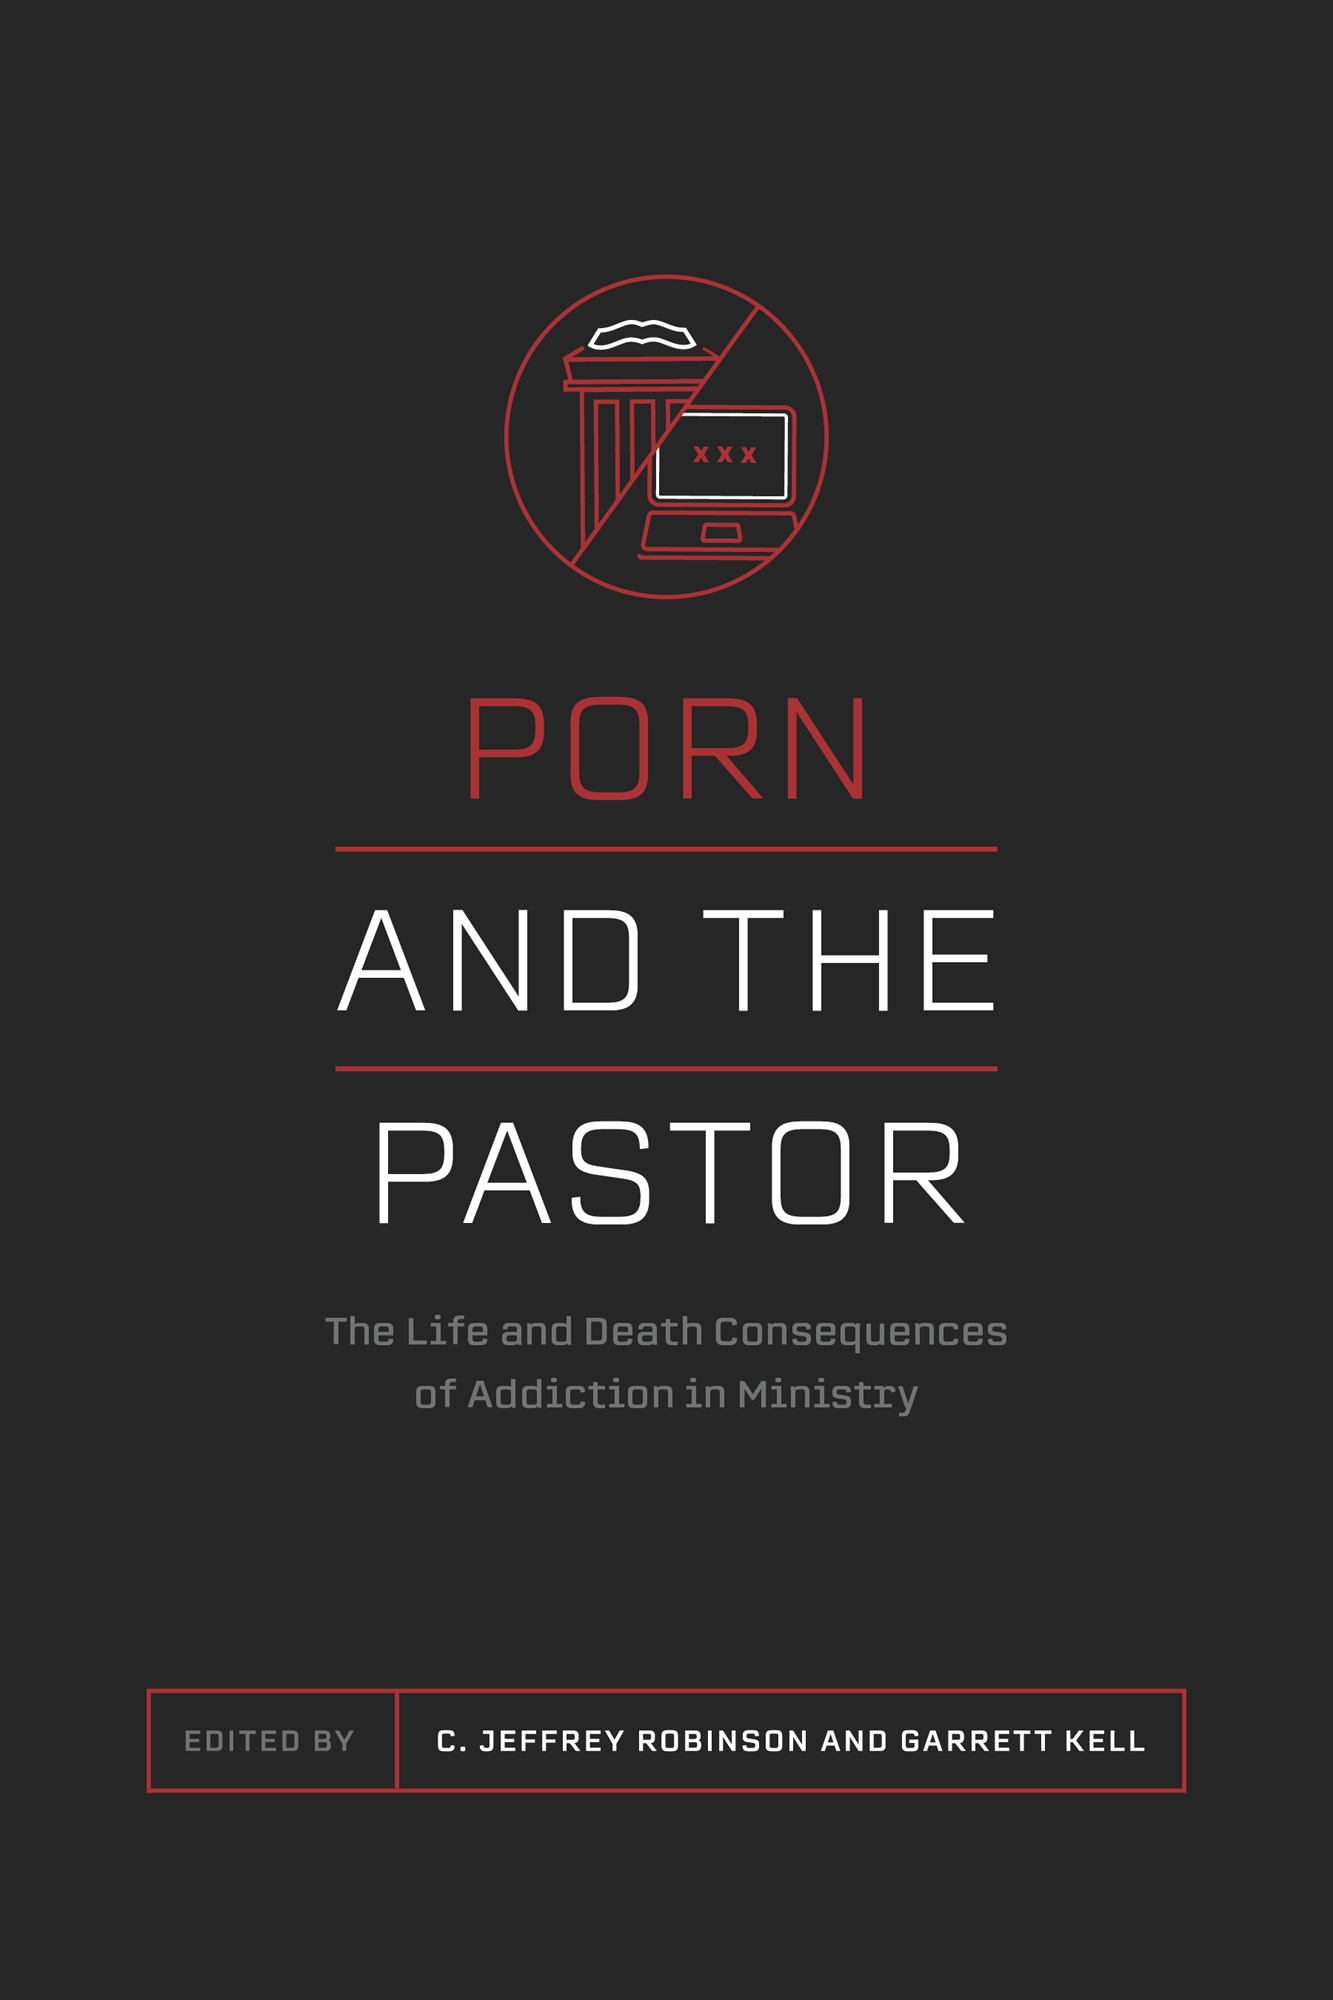 Bf Dawlod - Porn and the Pastor' e-book: Joint SBTS/TGC release | Baptist Press